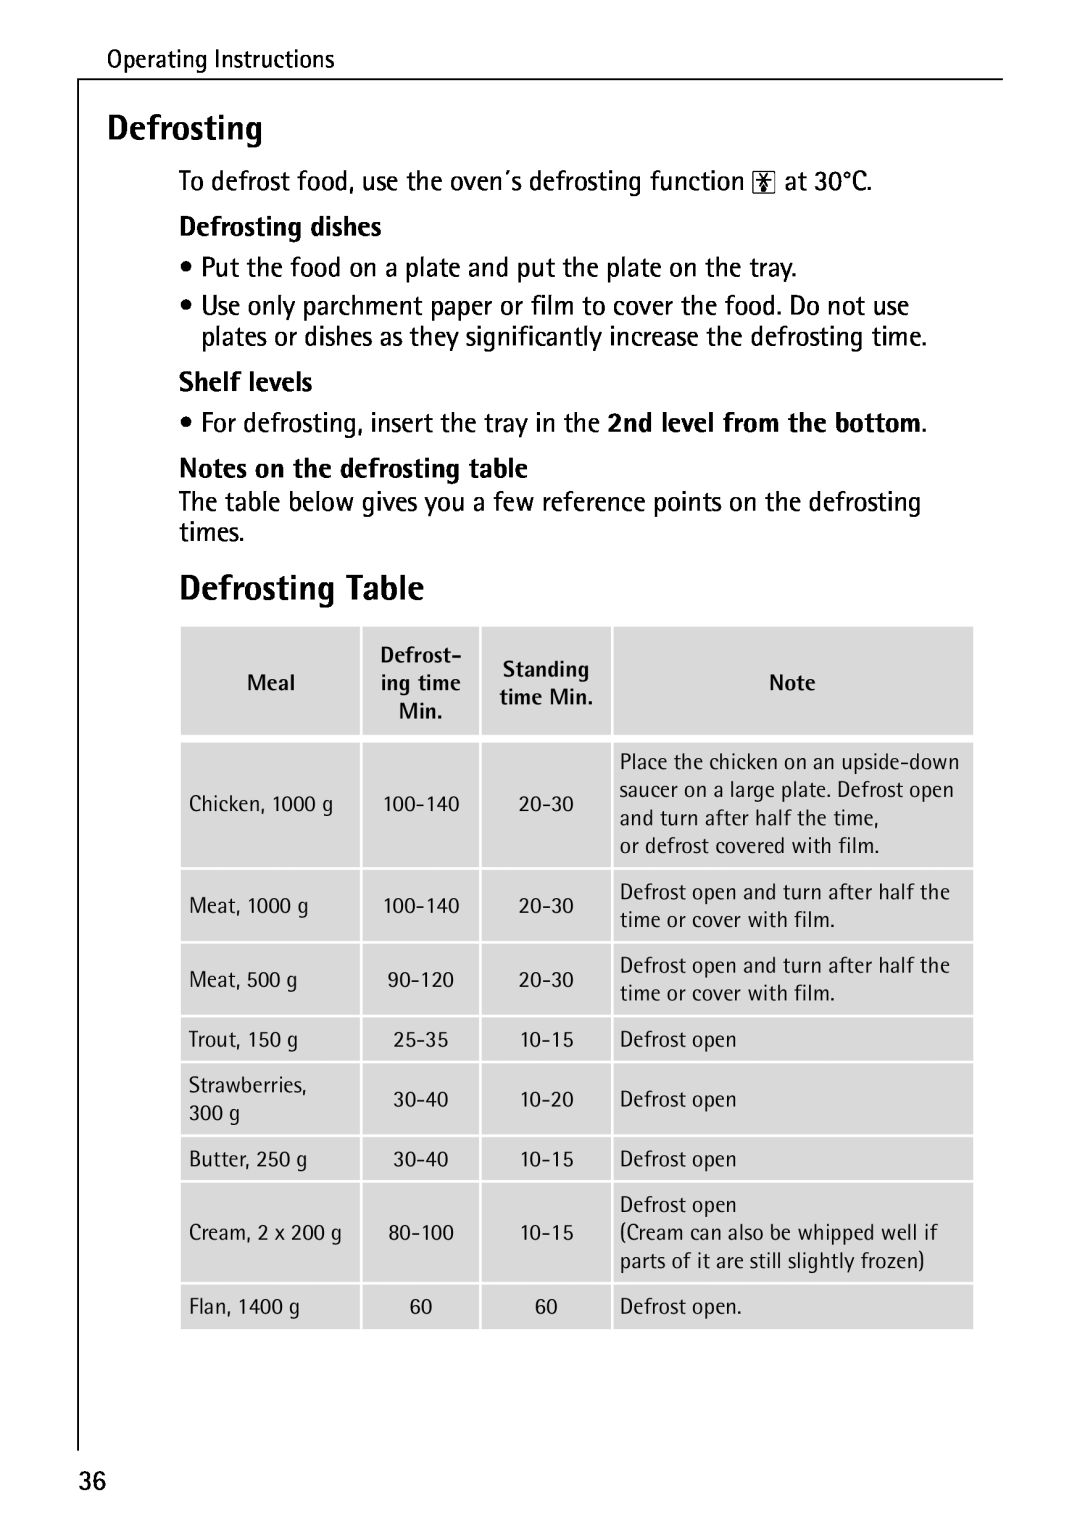 Electrolux B2190-1 manual Defrosting Table, Defrosting dishes, Shelf levels, Notes on the defrosting table 